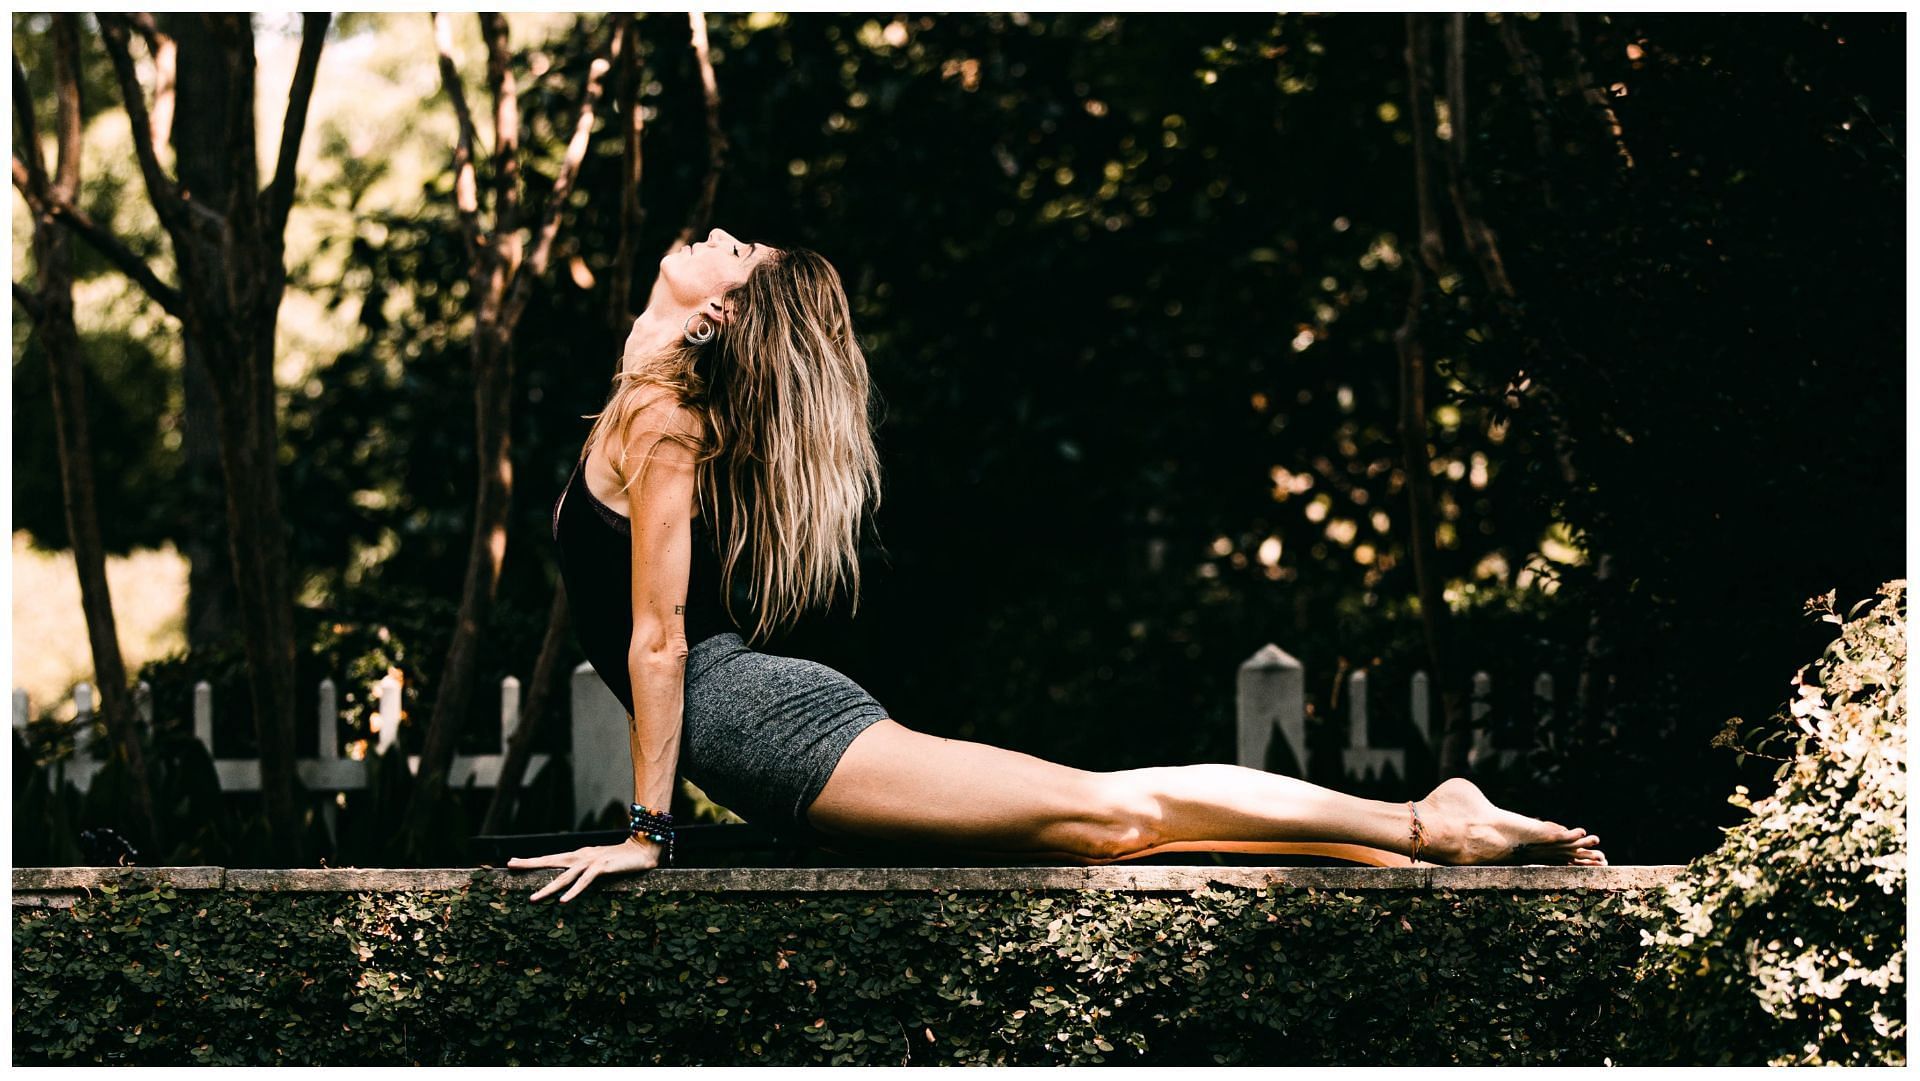 Core yoga poses can strengthen your abs and keep your spine flexible and strong. (Image via Unsplash/ Tabitha Turner)